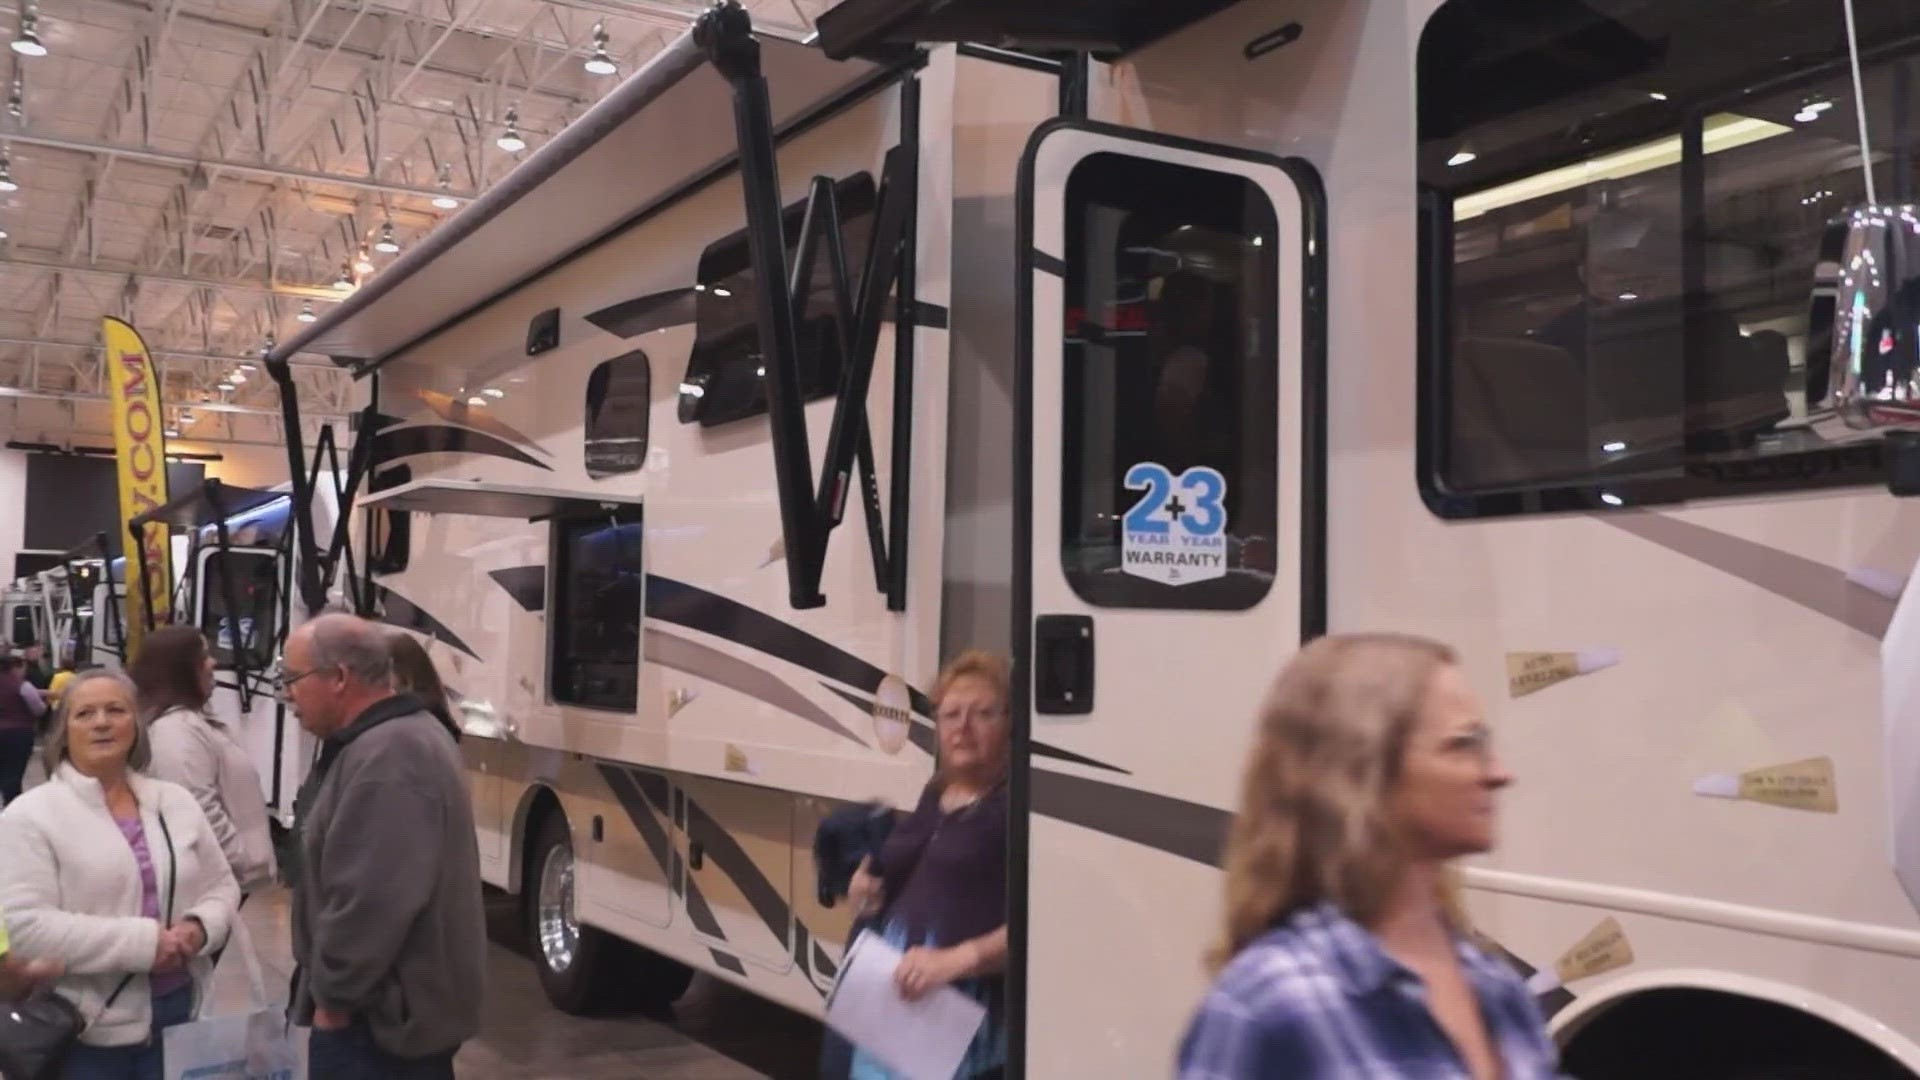 Leon and Kierra sit down with Amy Girton, Executive Director of the Great Lakes RV Association, to talk about the 46th Annual Ohio RV Supershow.